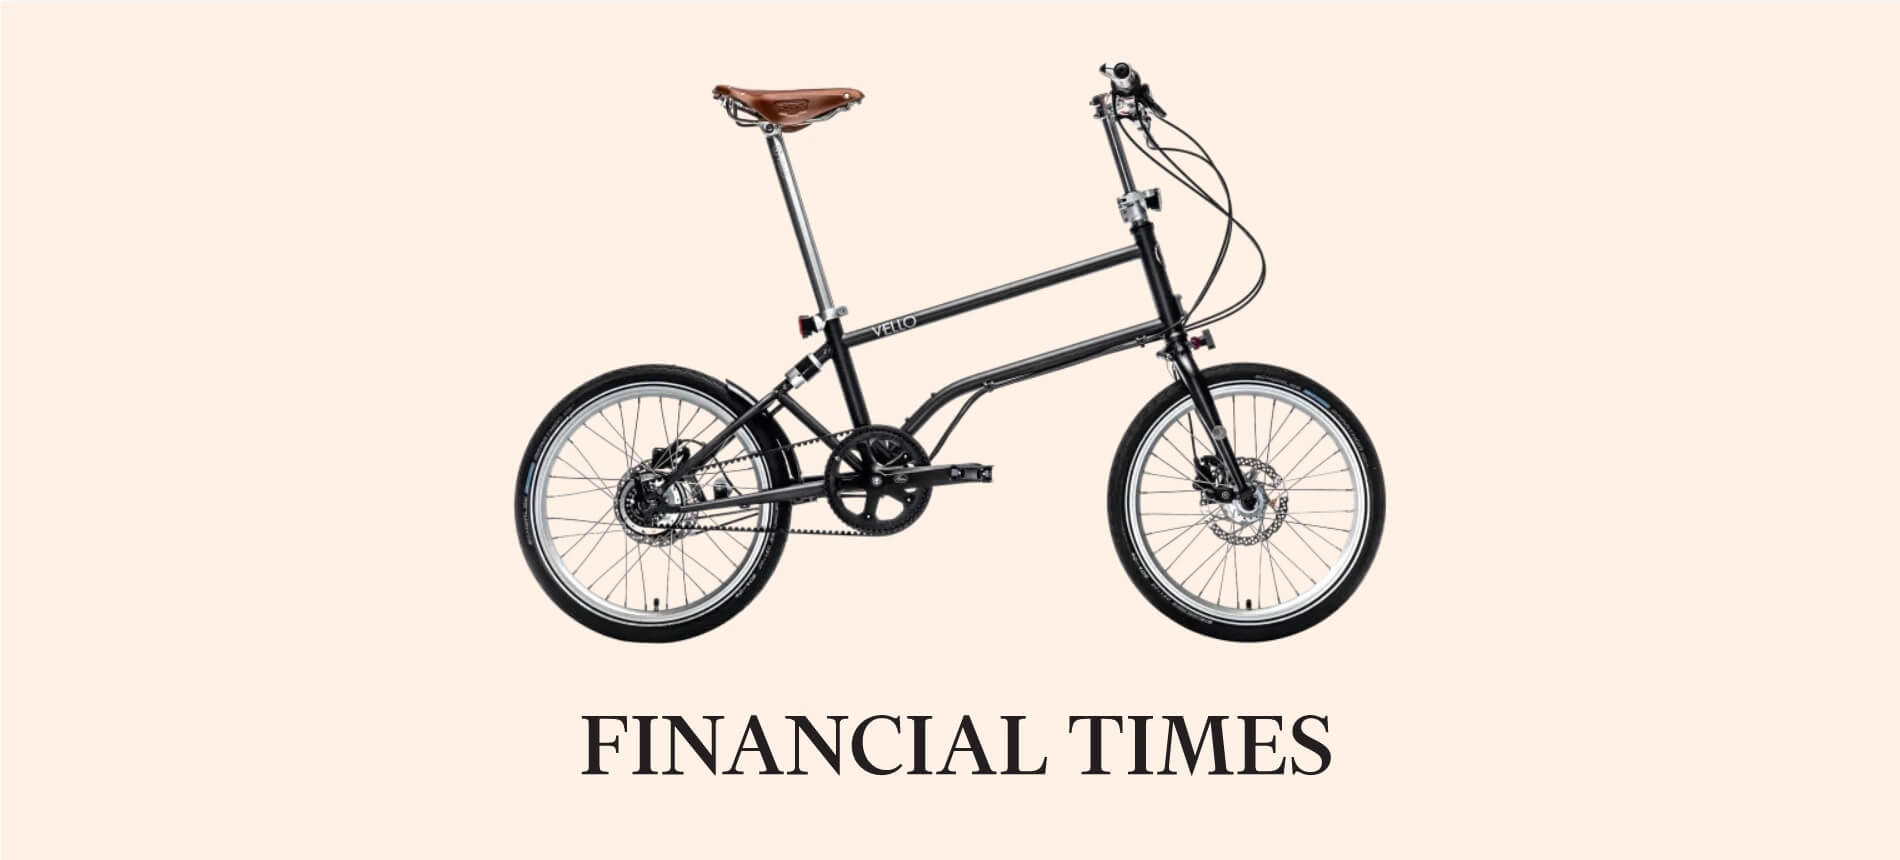 VELLO bike Rohloff Special Edition featured in the Financial Times